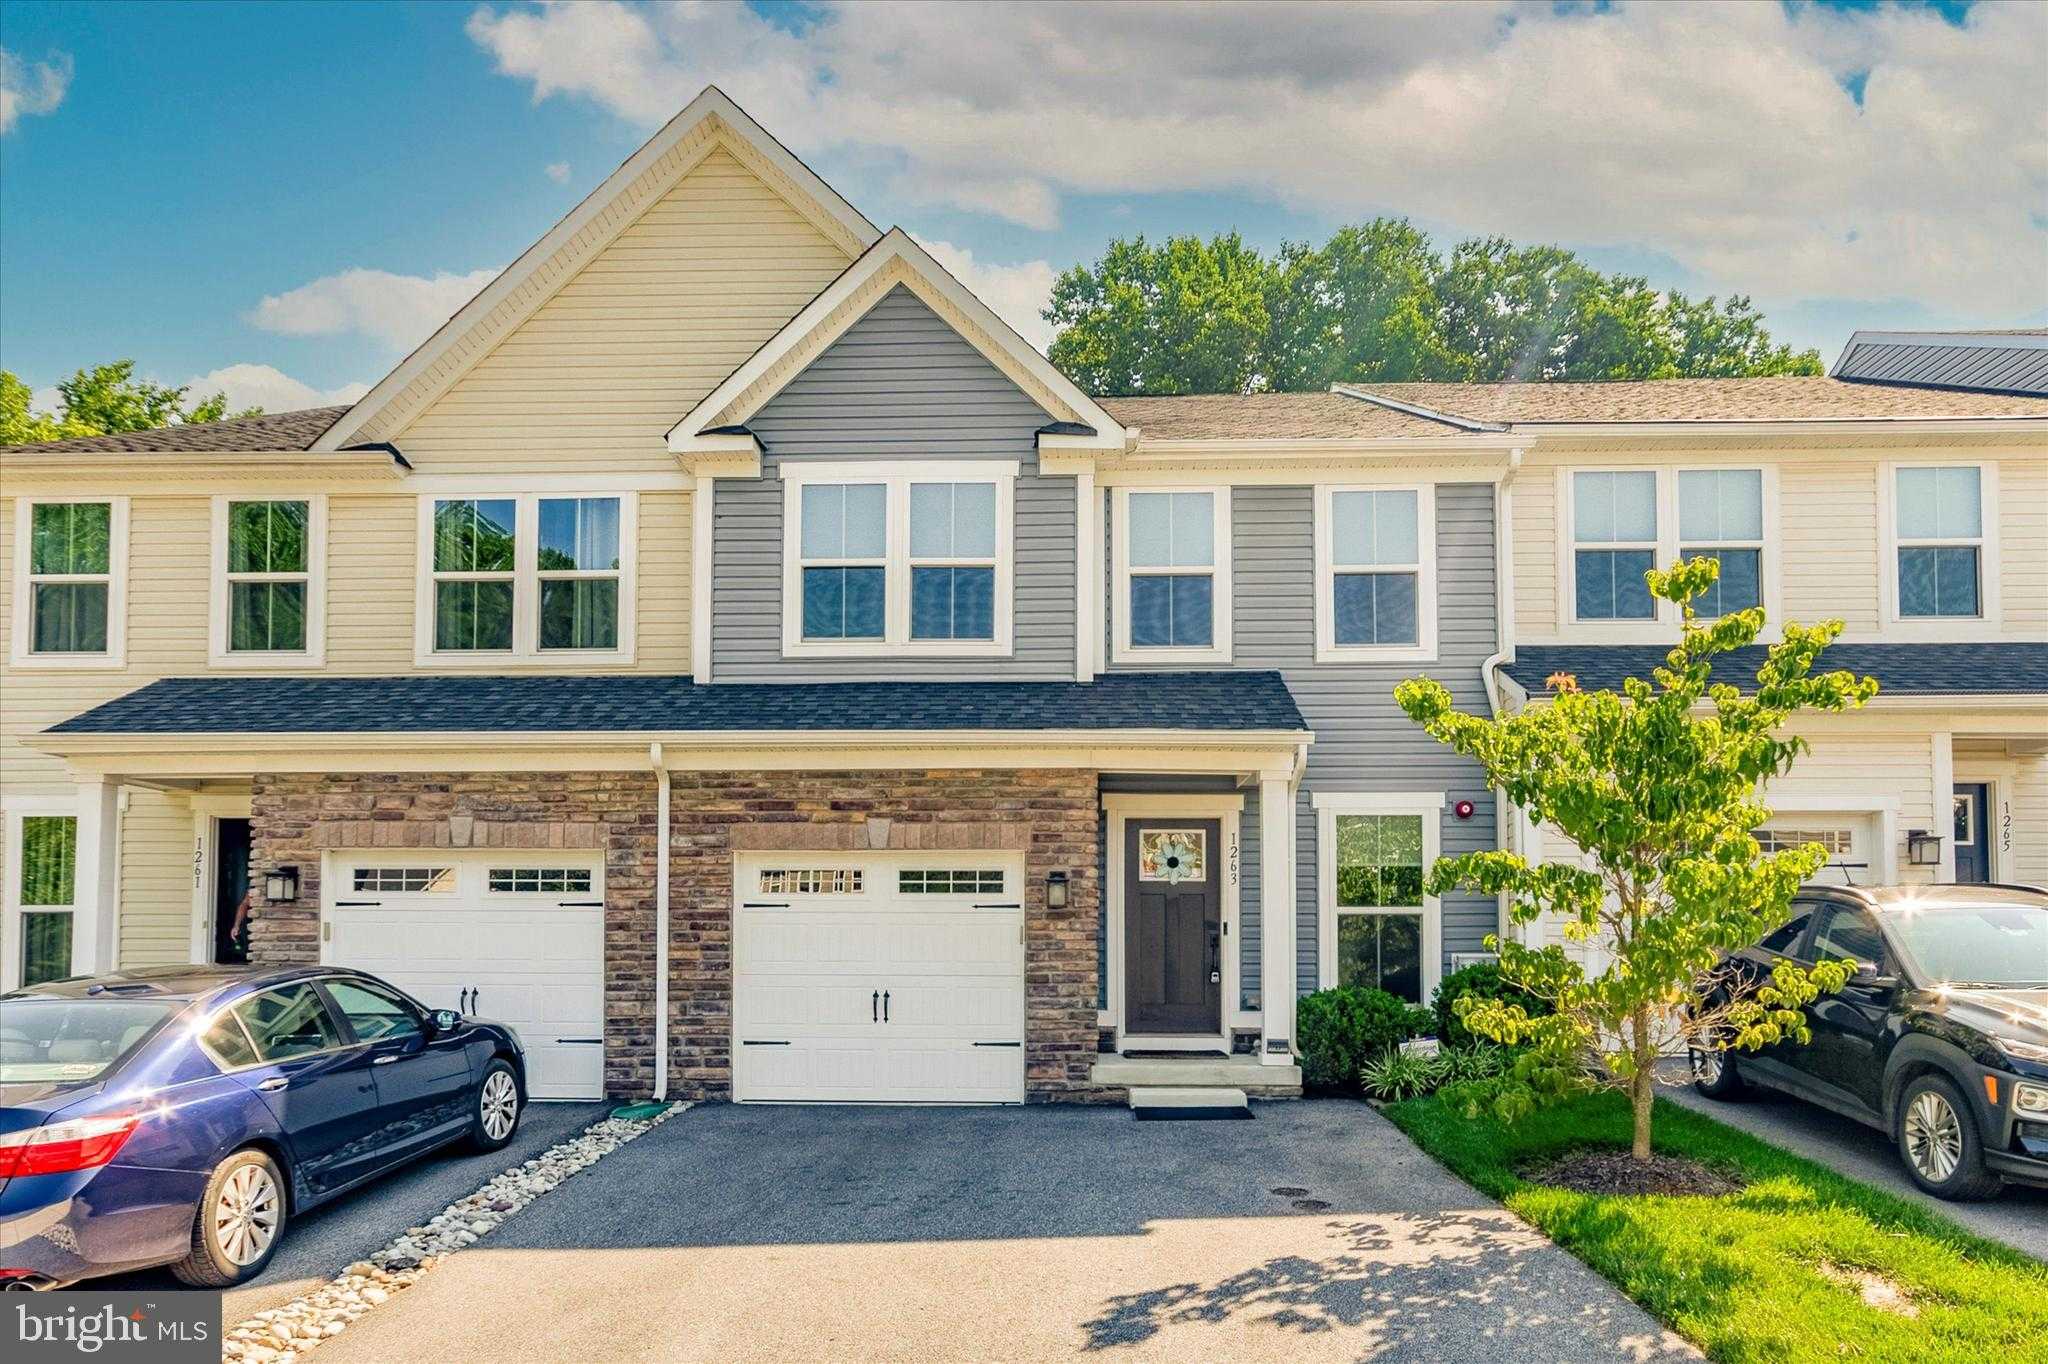 View KENNETT SQUARE, PA 19348 townhome